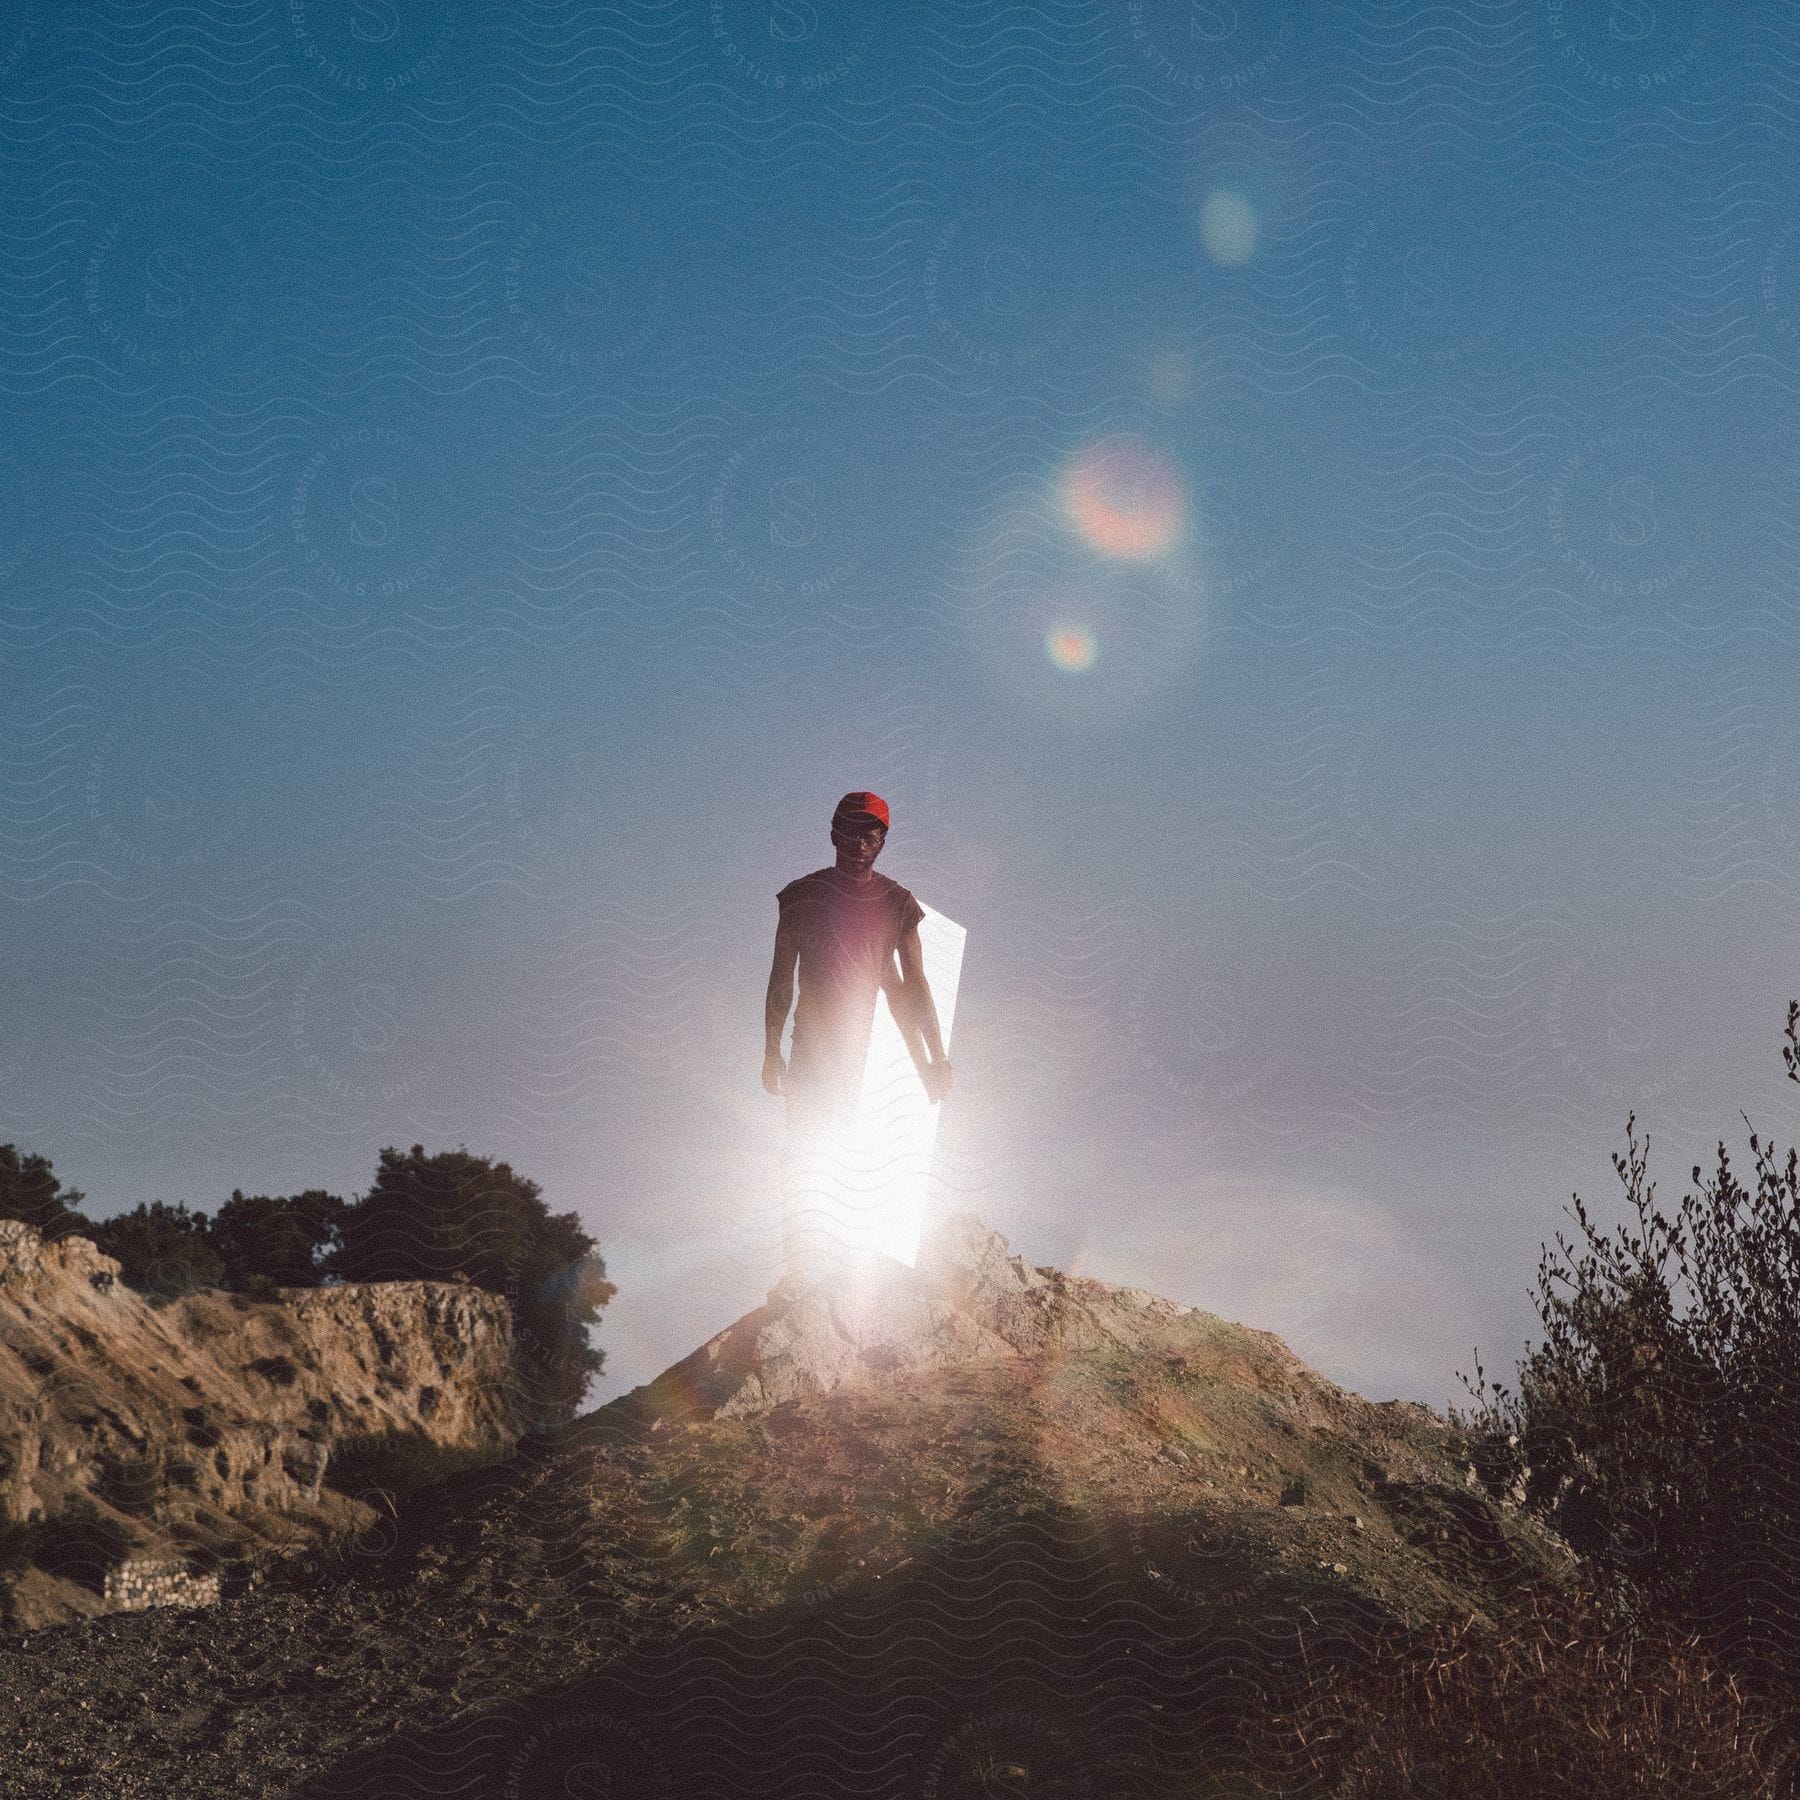 Man standing on a rock holding a mirror reflecting the sun wearing a red cap and black tshirt